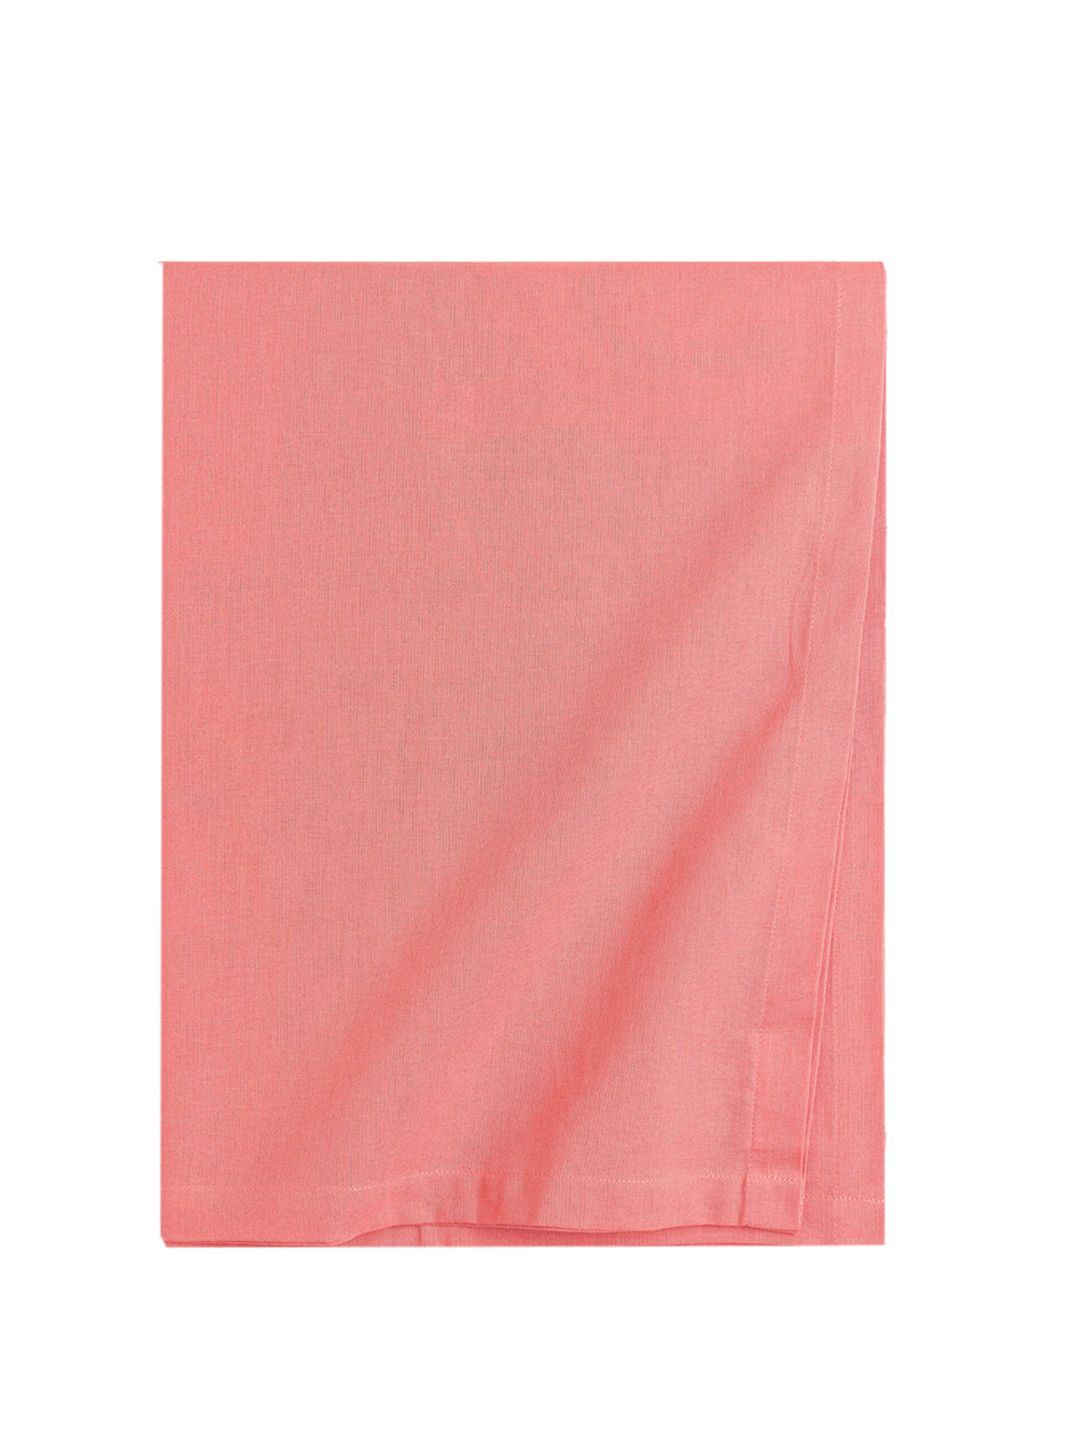 H&M Pink Solid Rectangular Cotton Tablecloth Price in India